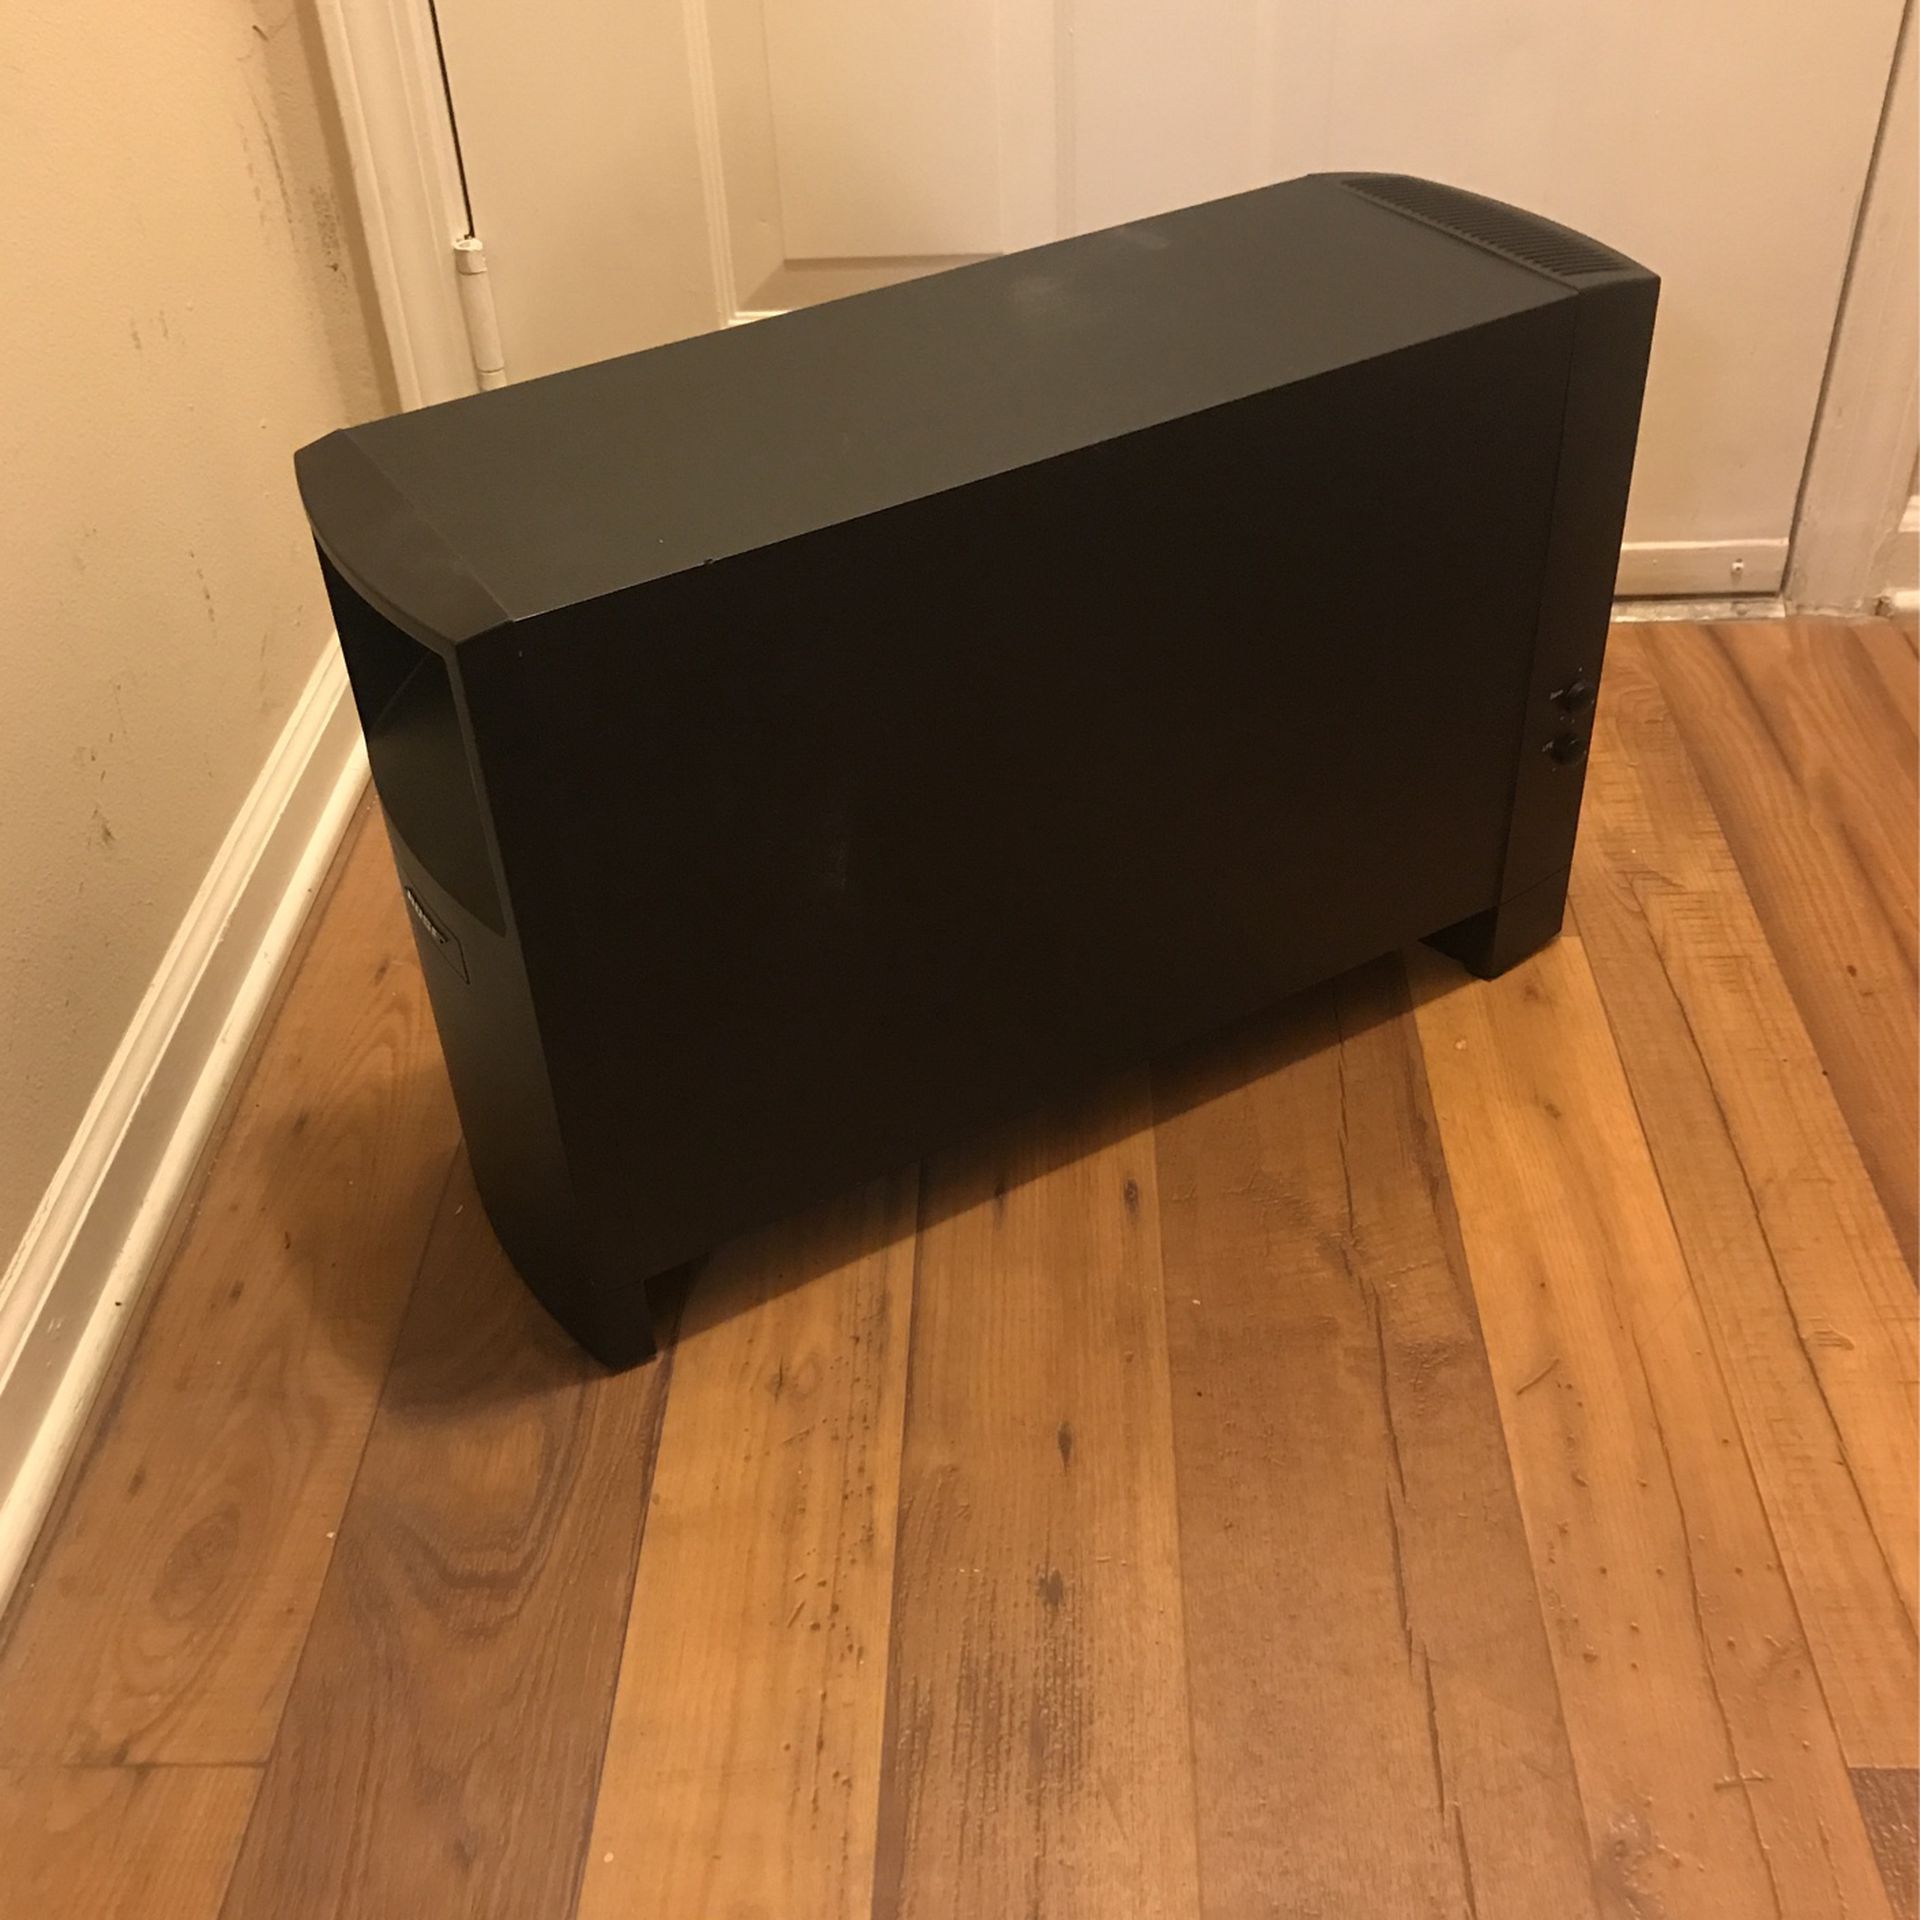 BOSE ACOUSTIMASS 10 IV HOME ENT SYSTEM